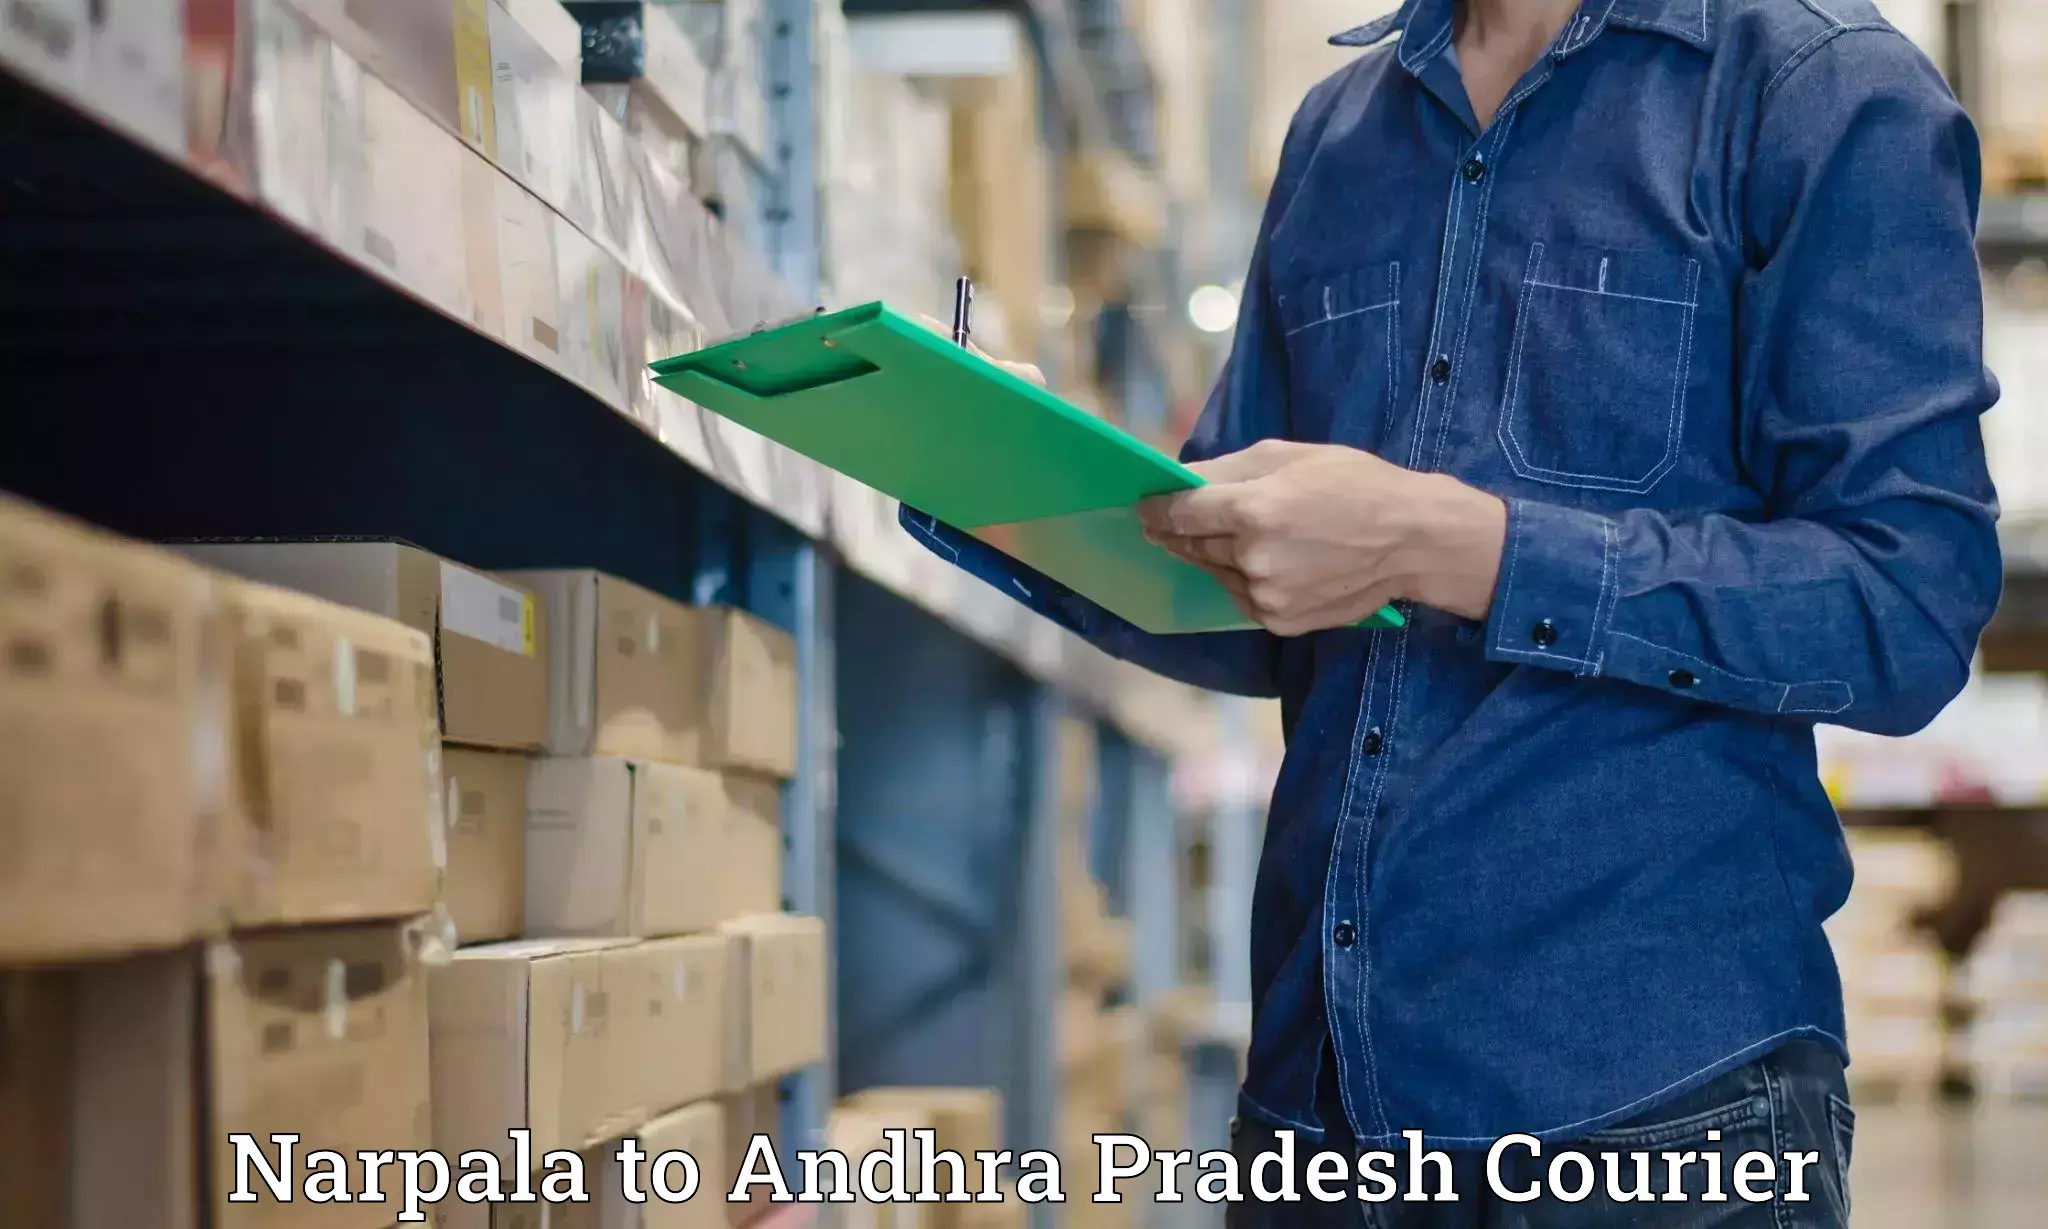 Cash on delivery service Narpala to Chittoor